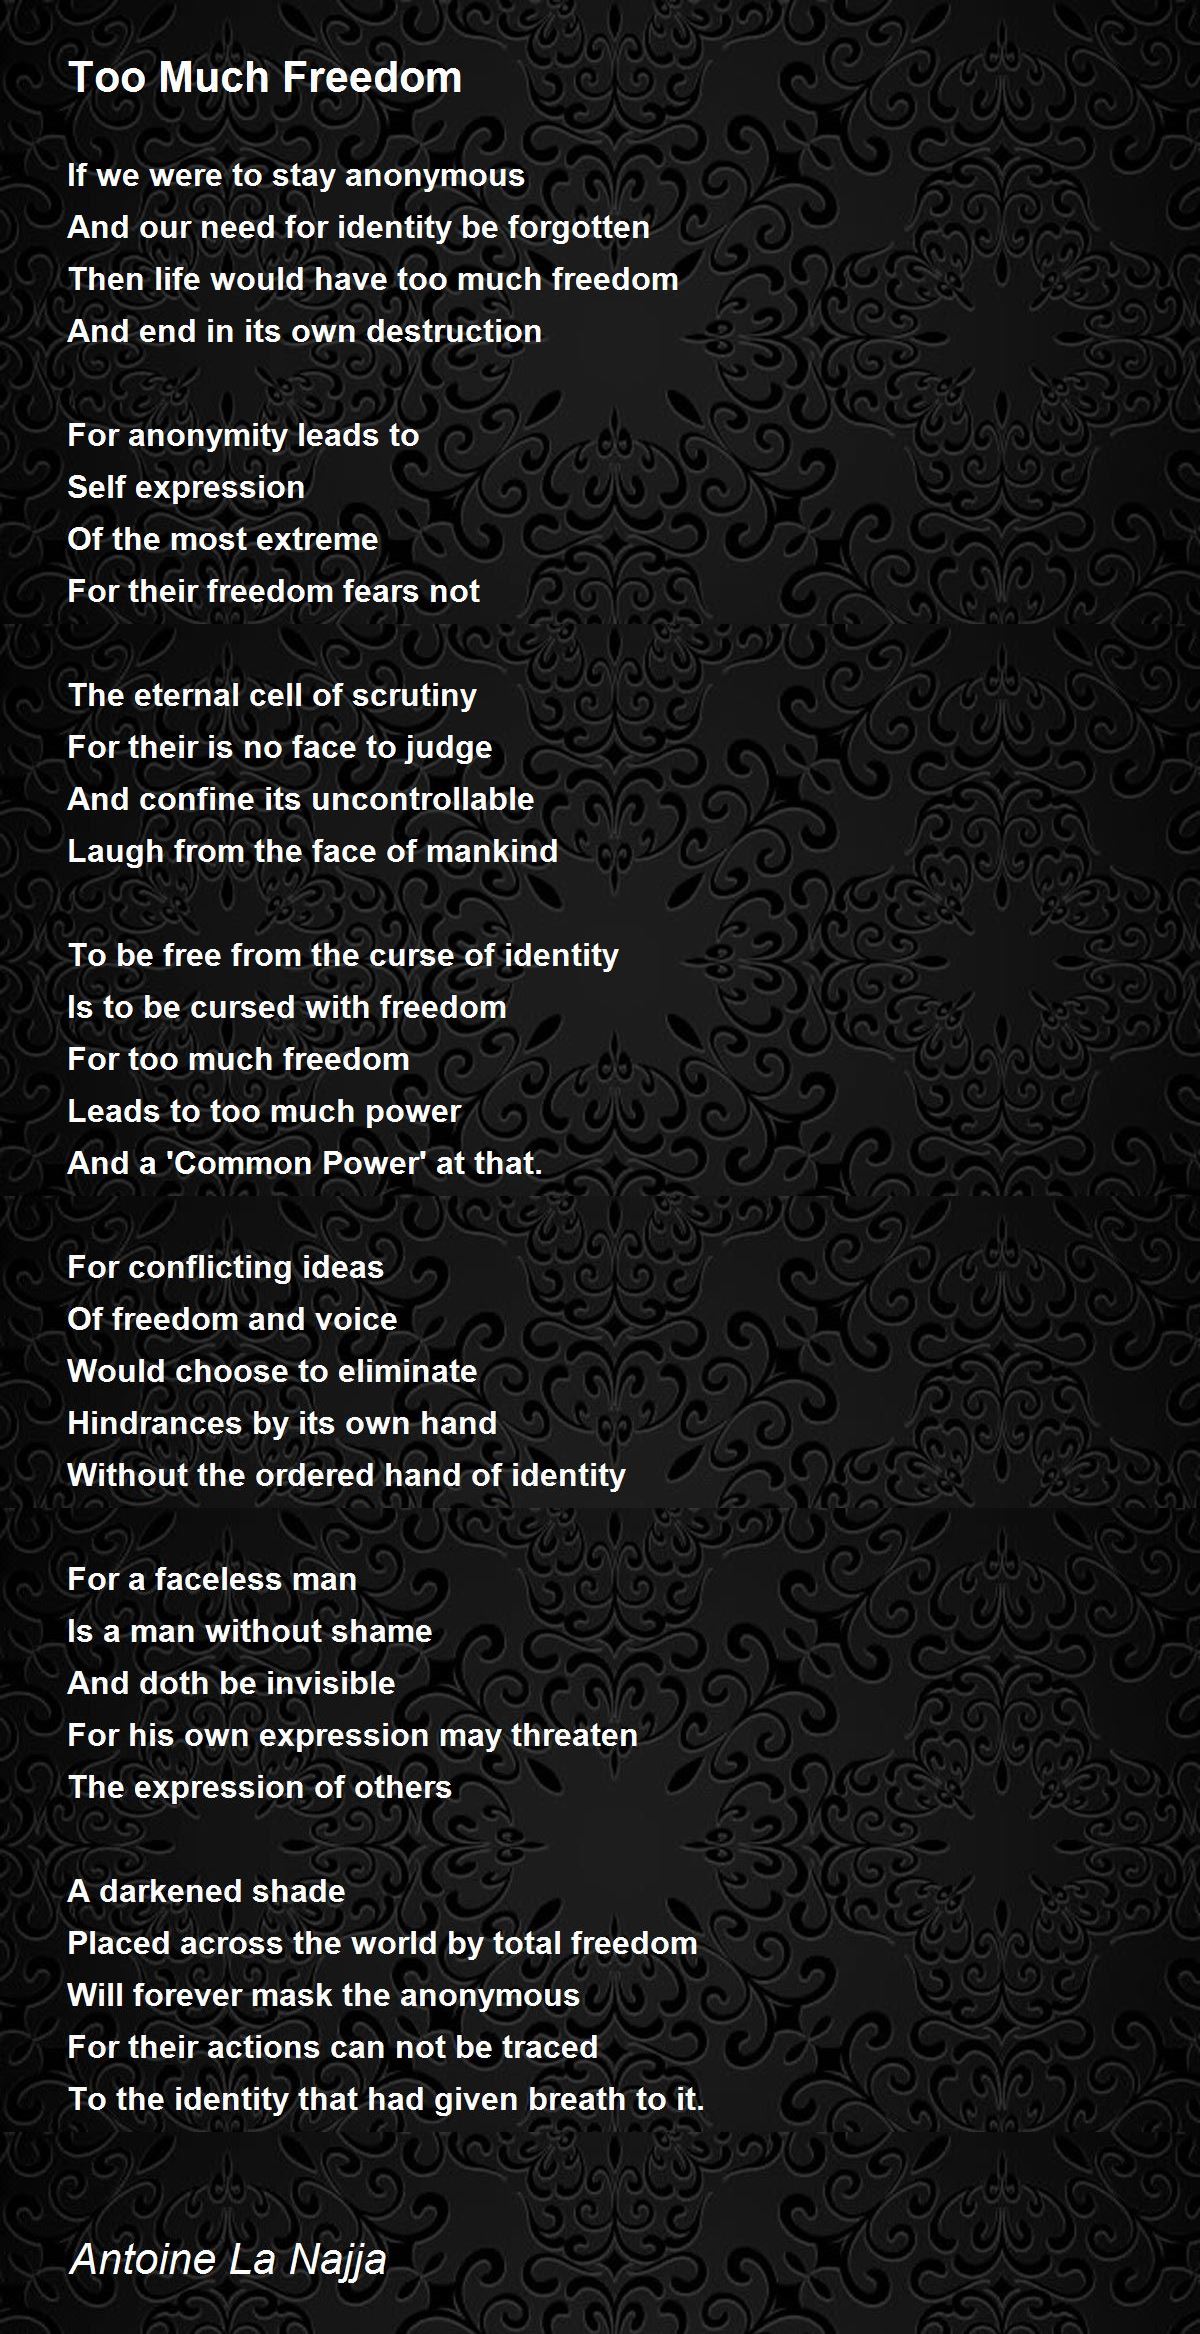 Too Much Freedom - Too Much Freedom Poem by Antoine La Najja